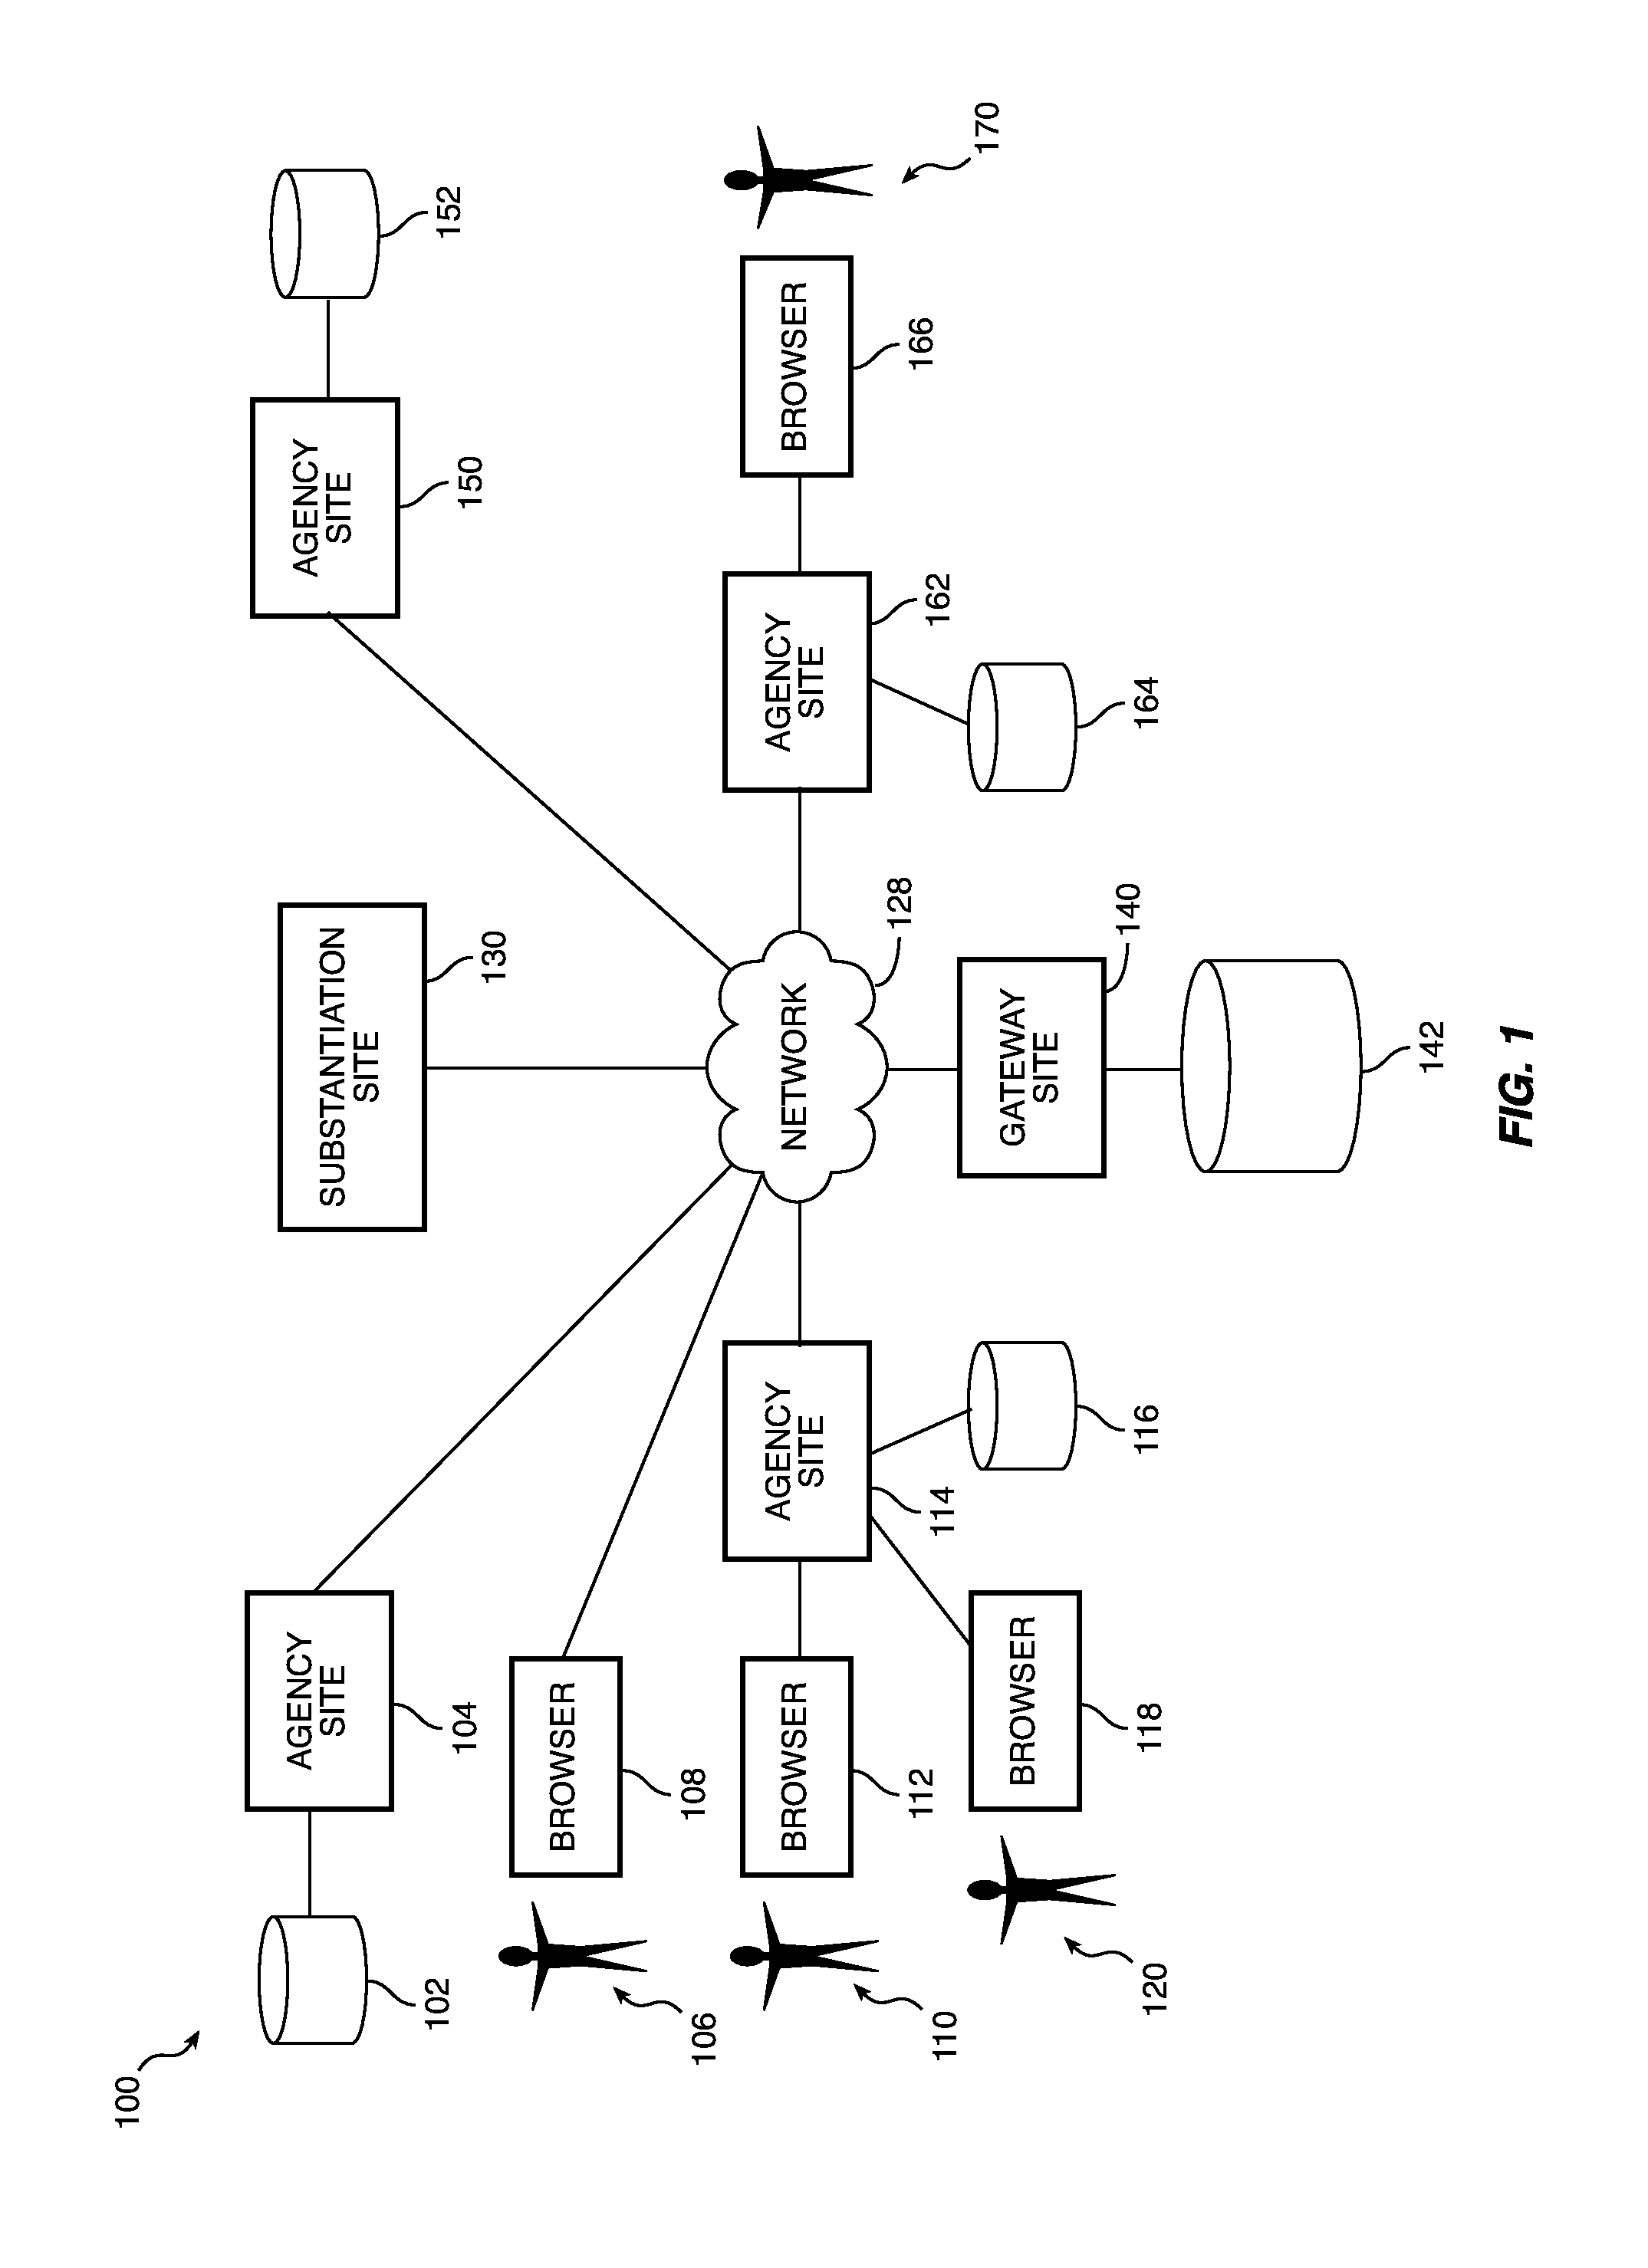 Systems and methods for managing disclosure of protectable information